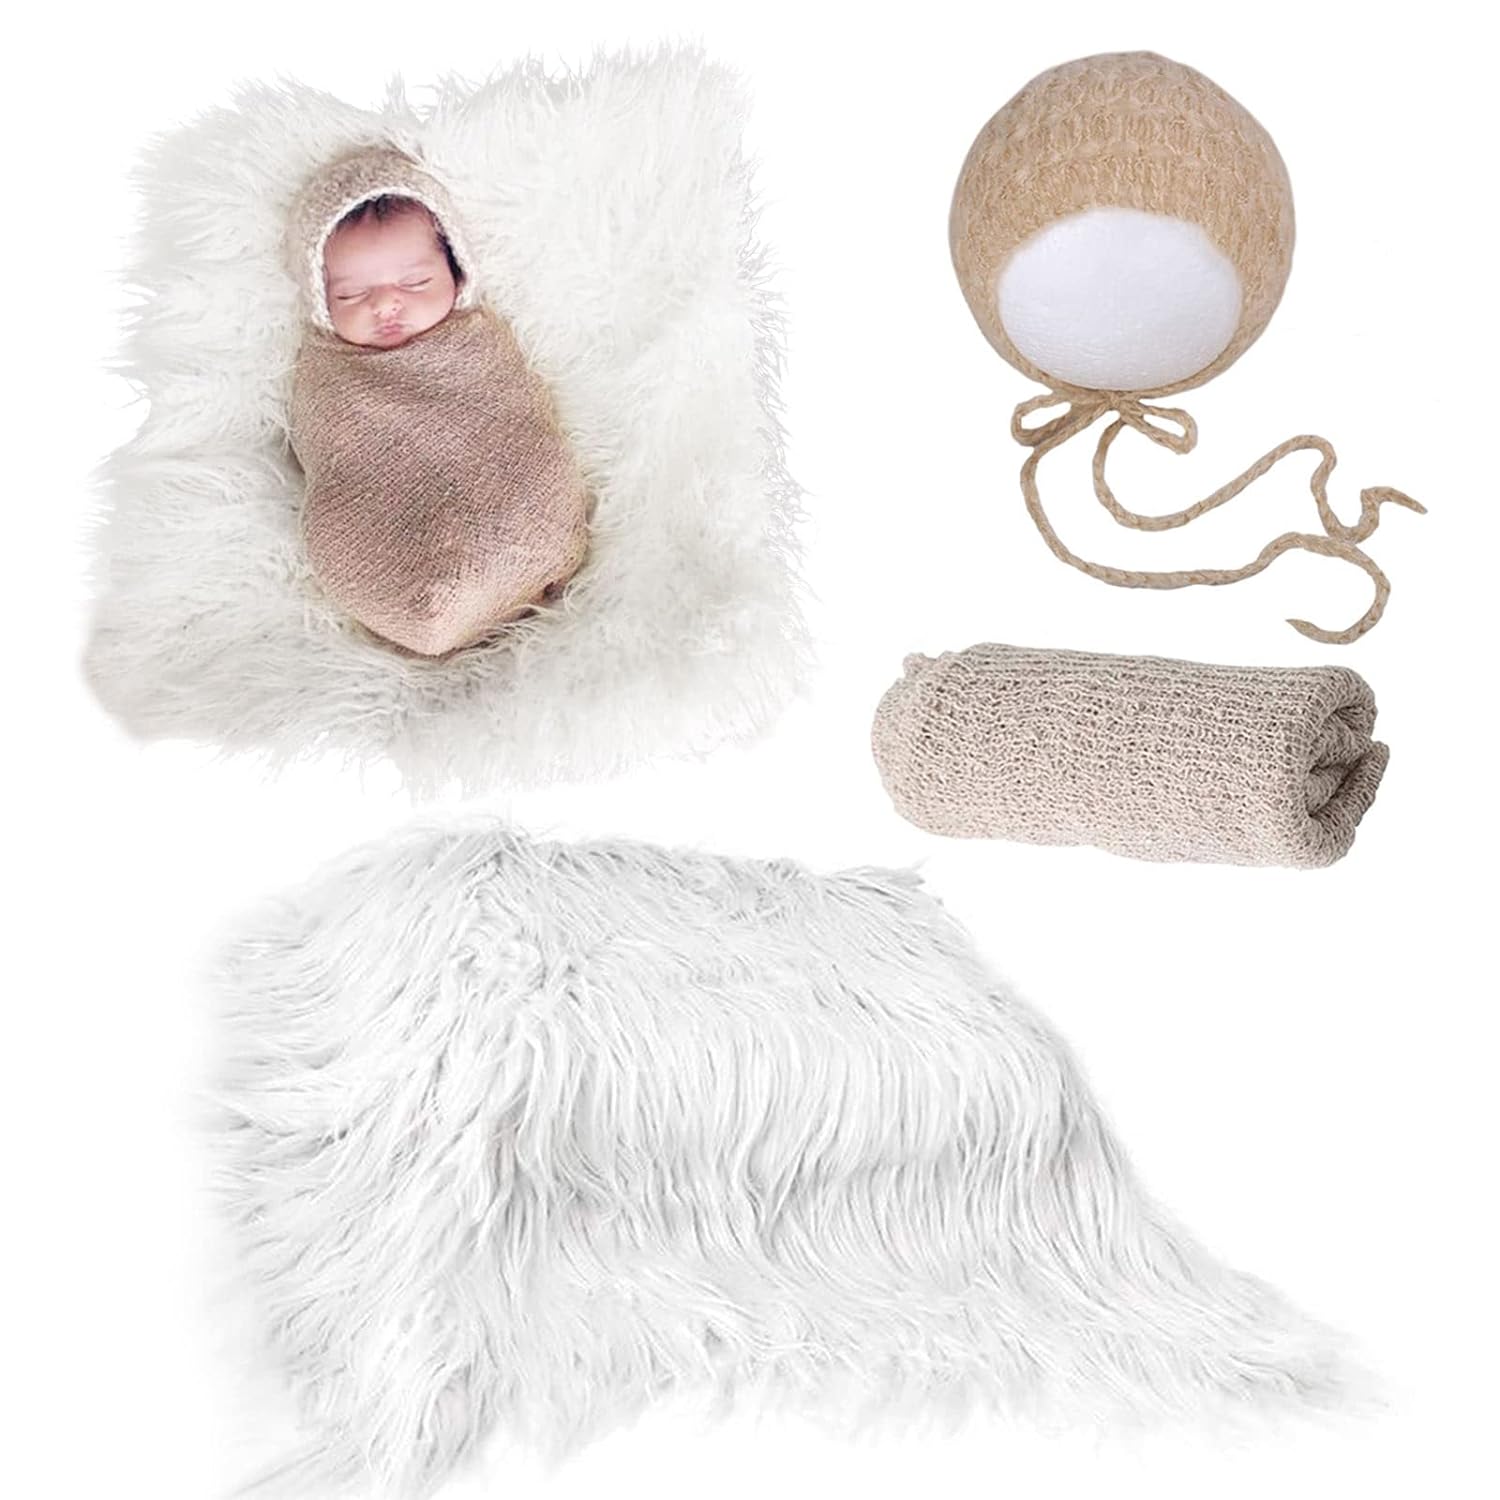 Great Choice Products Newborn Photography Props Outfits 3 Pcs Baby Long Ripple Wrap With And Toddler Swaddle Blankets Photography Mat With Cute Cro…